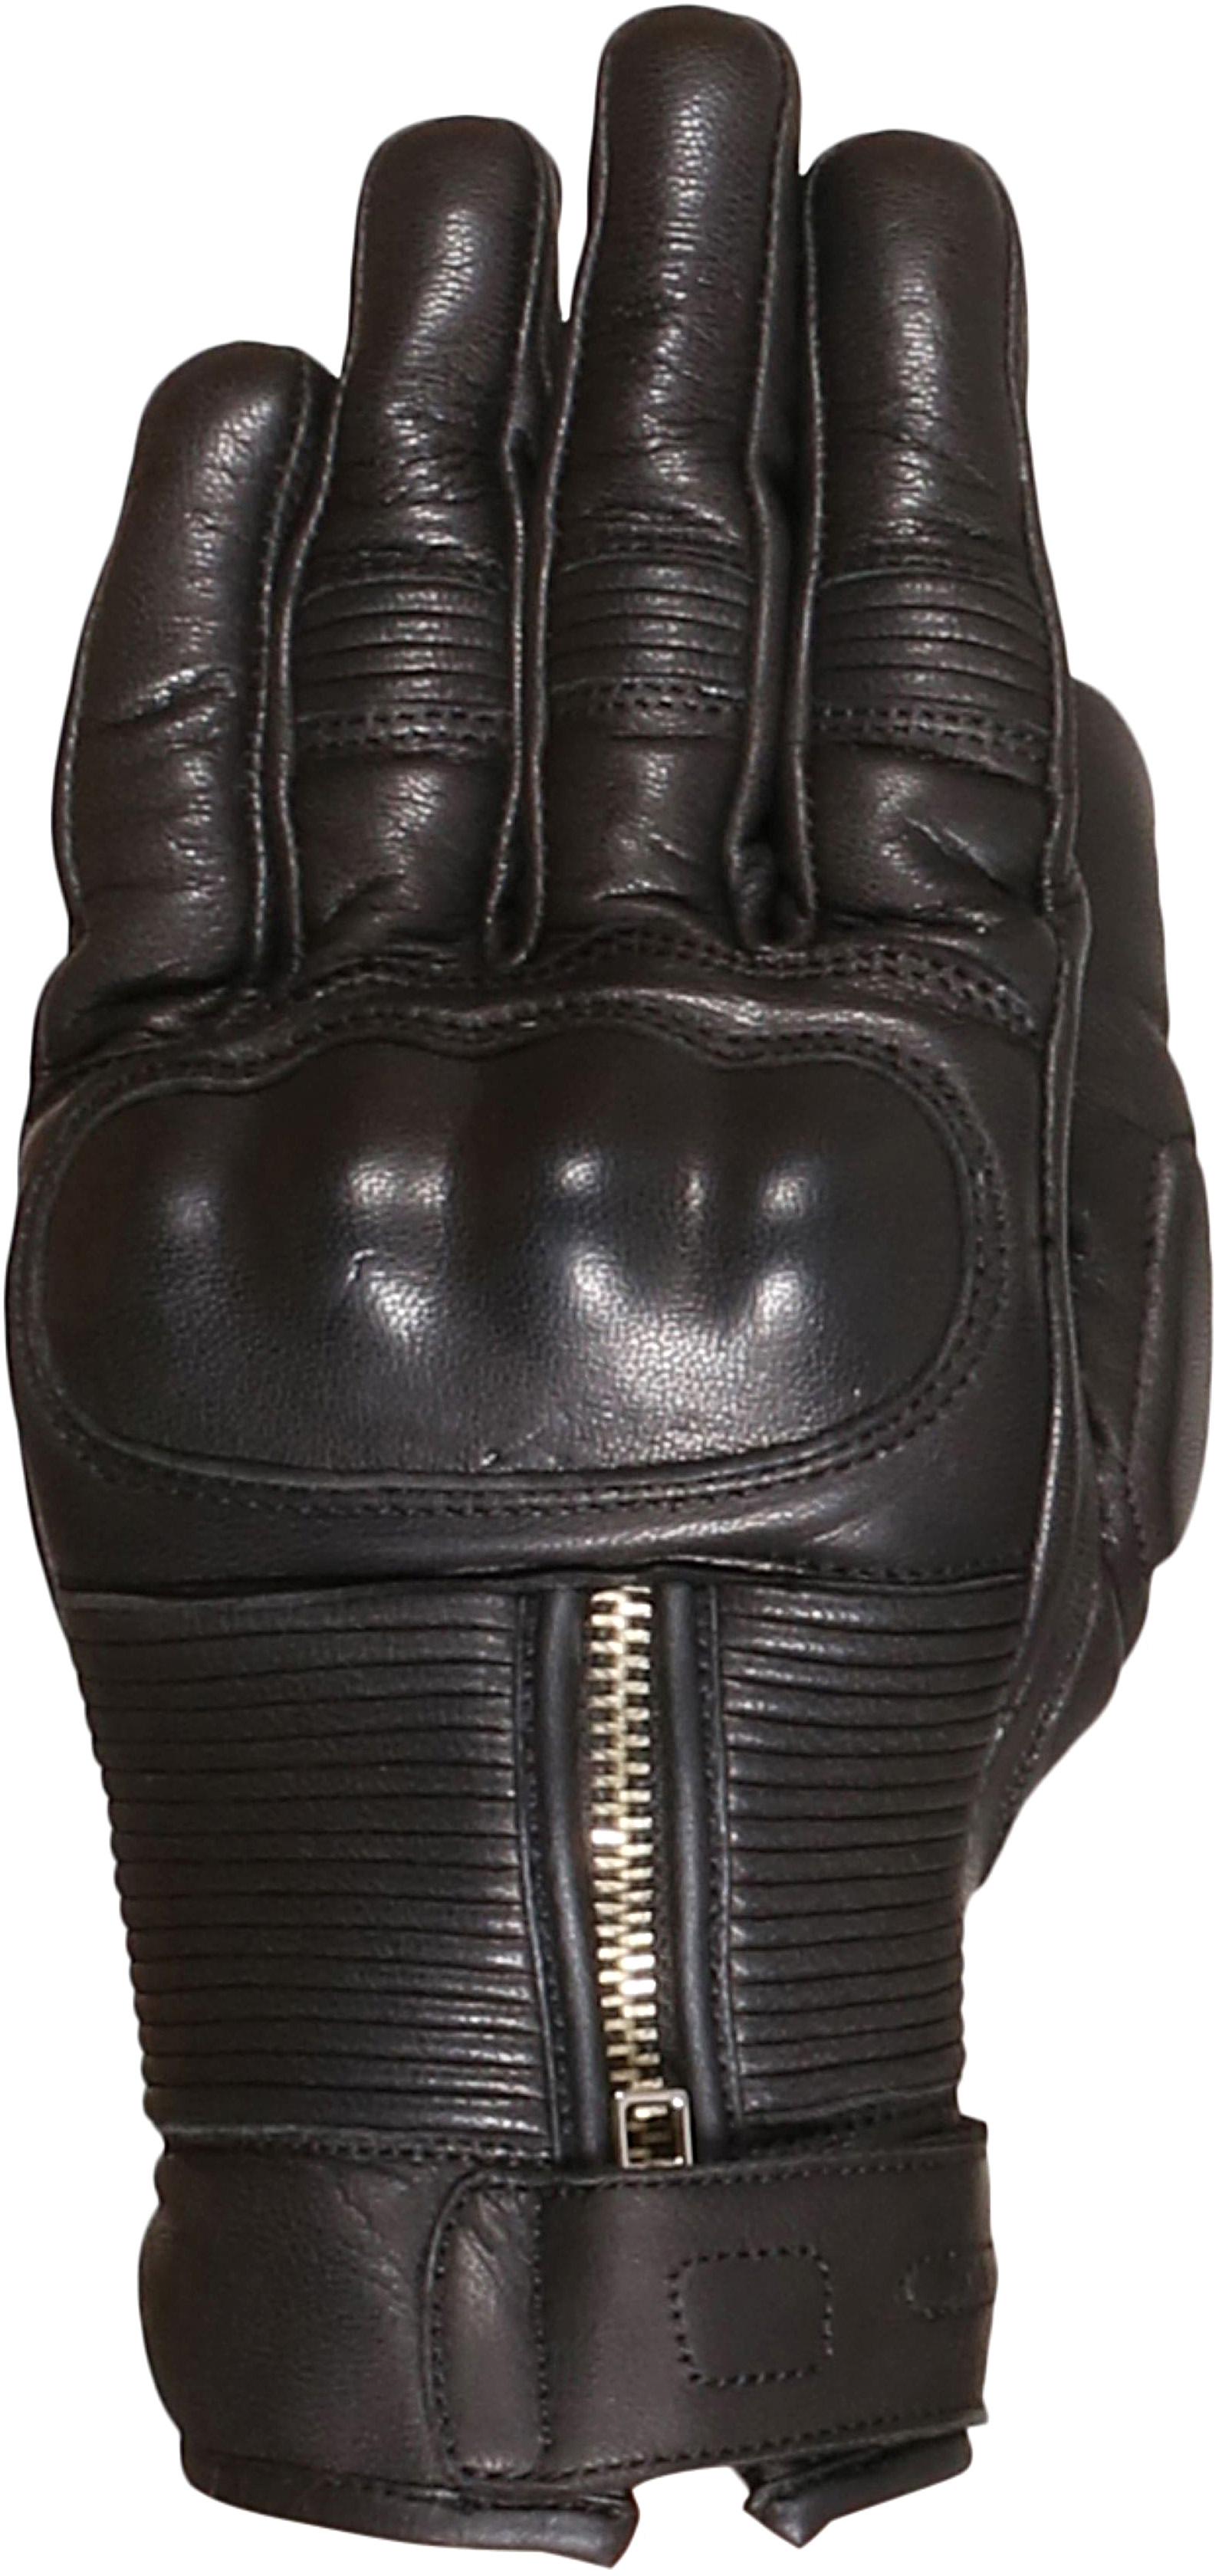 Weise Union Motorcycle Gloves - Black, L